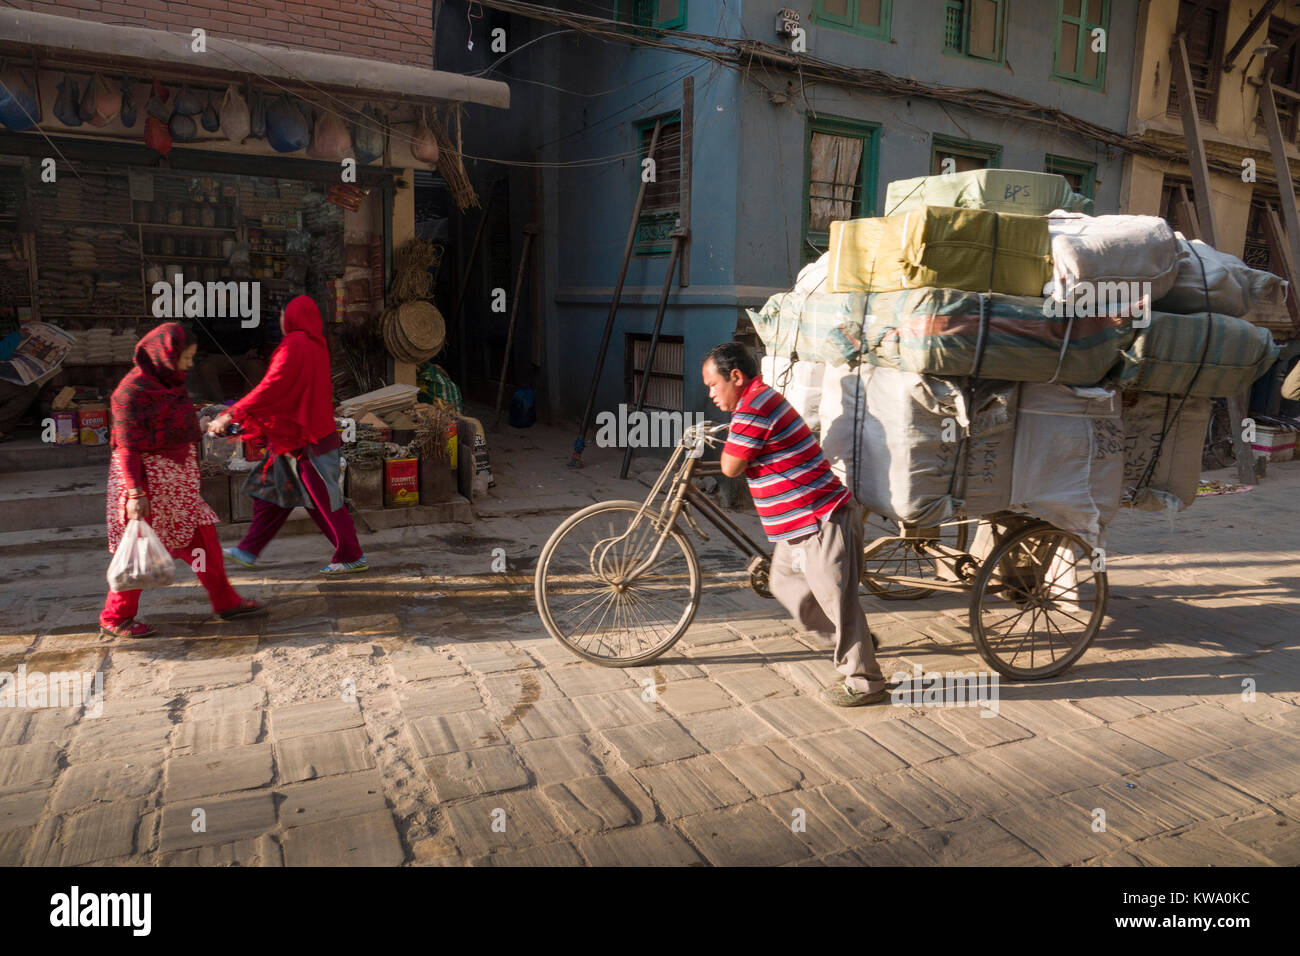 Man pushes tricycle loaded with cargo along dusty street of Kathmandu, Nepal Stock Photo